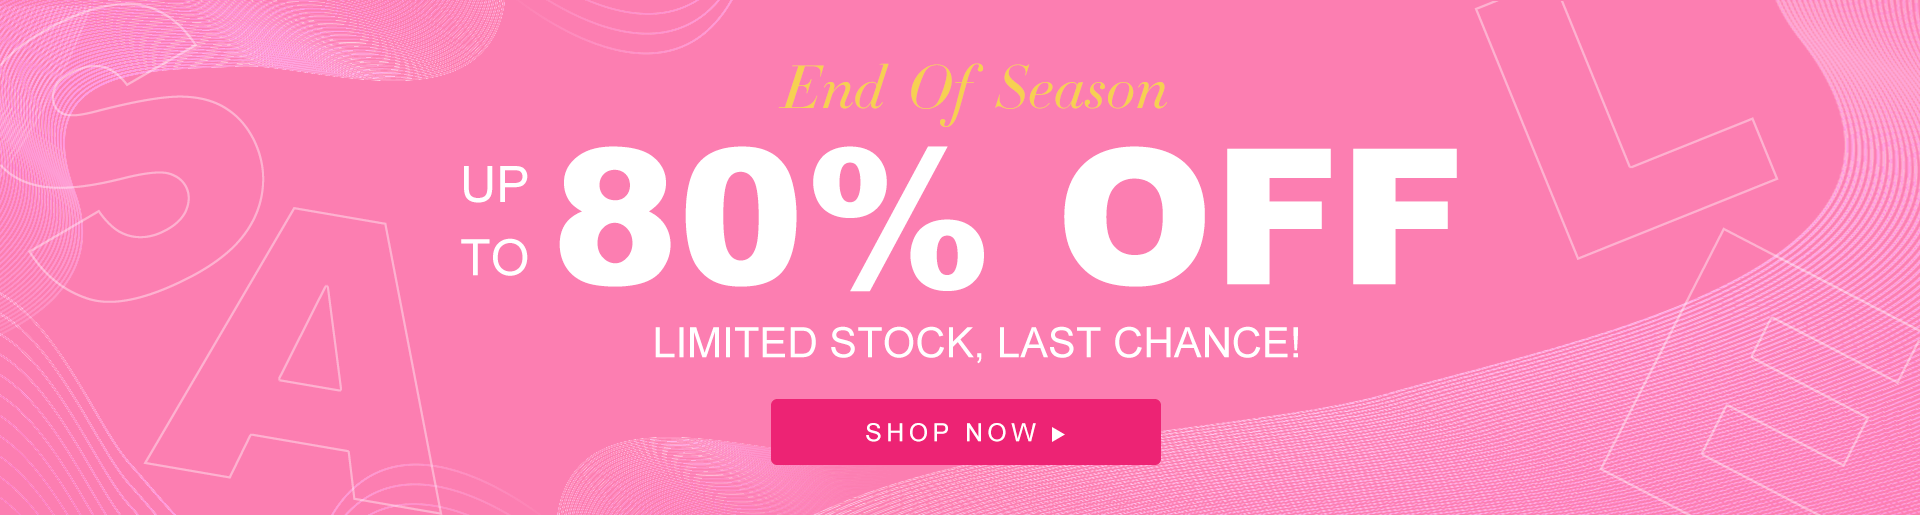 End  Of  Season Up to 80% off